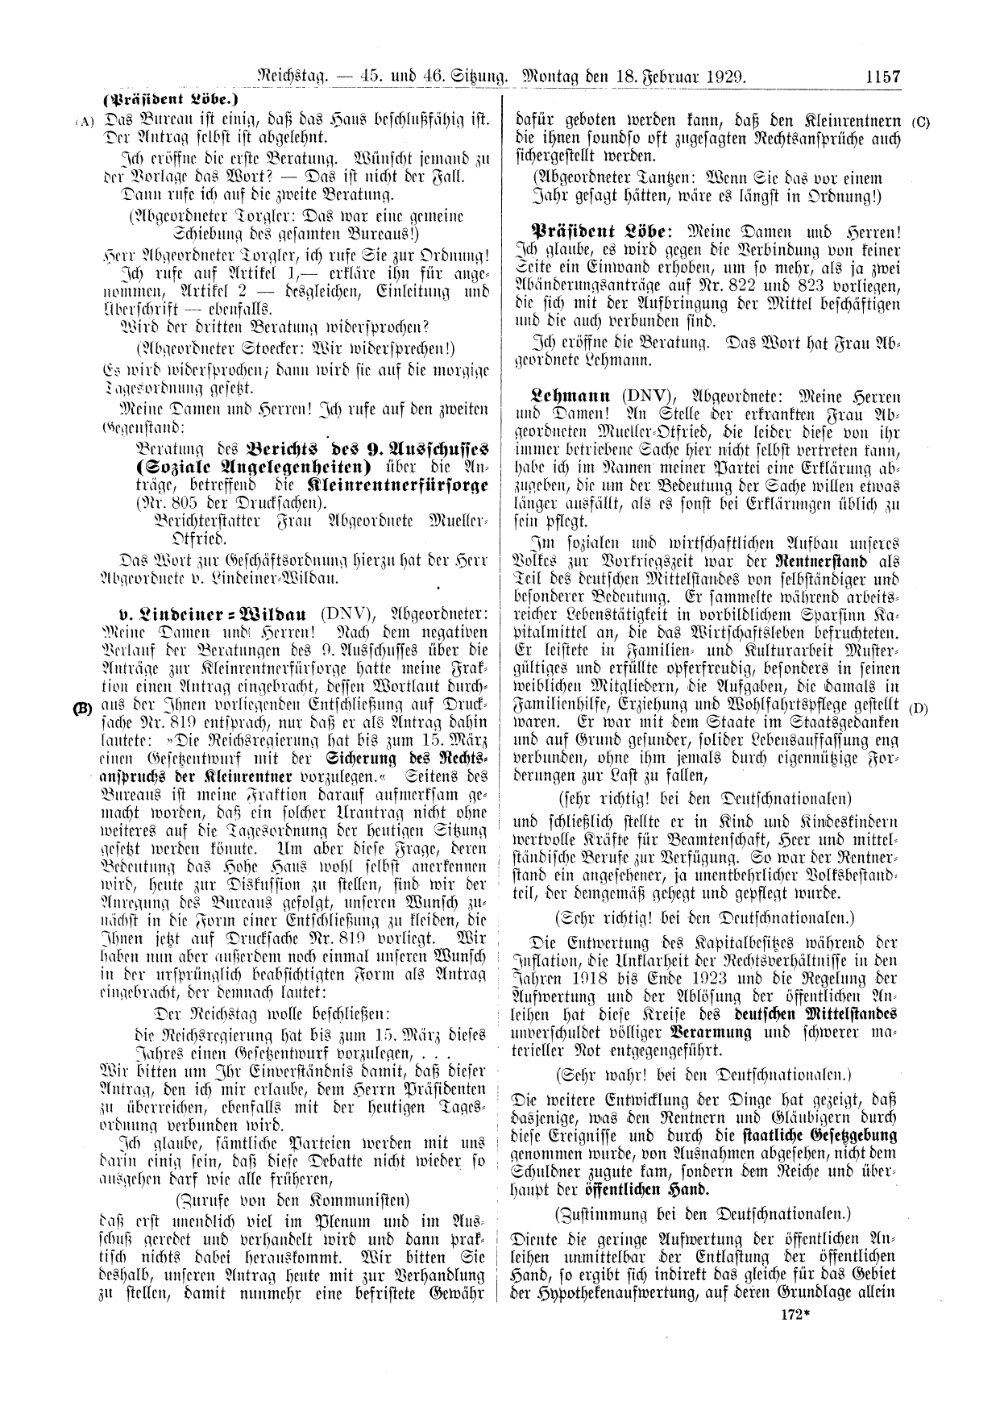 Scan of page 1157